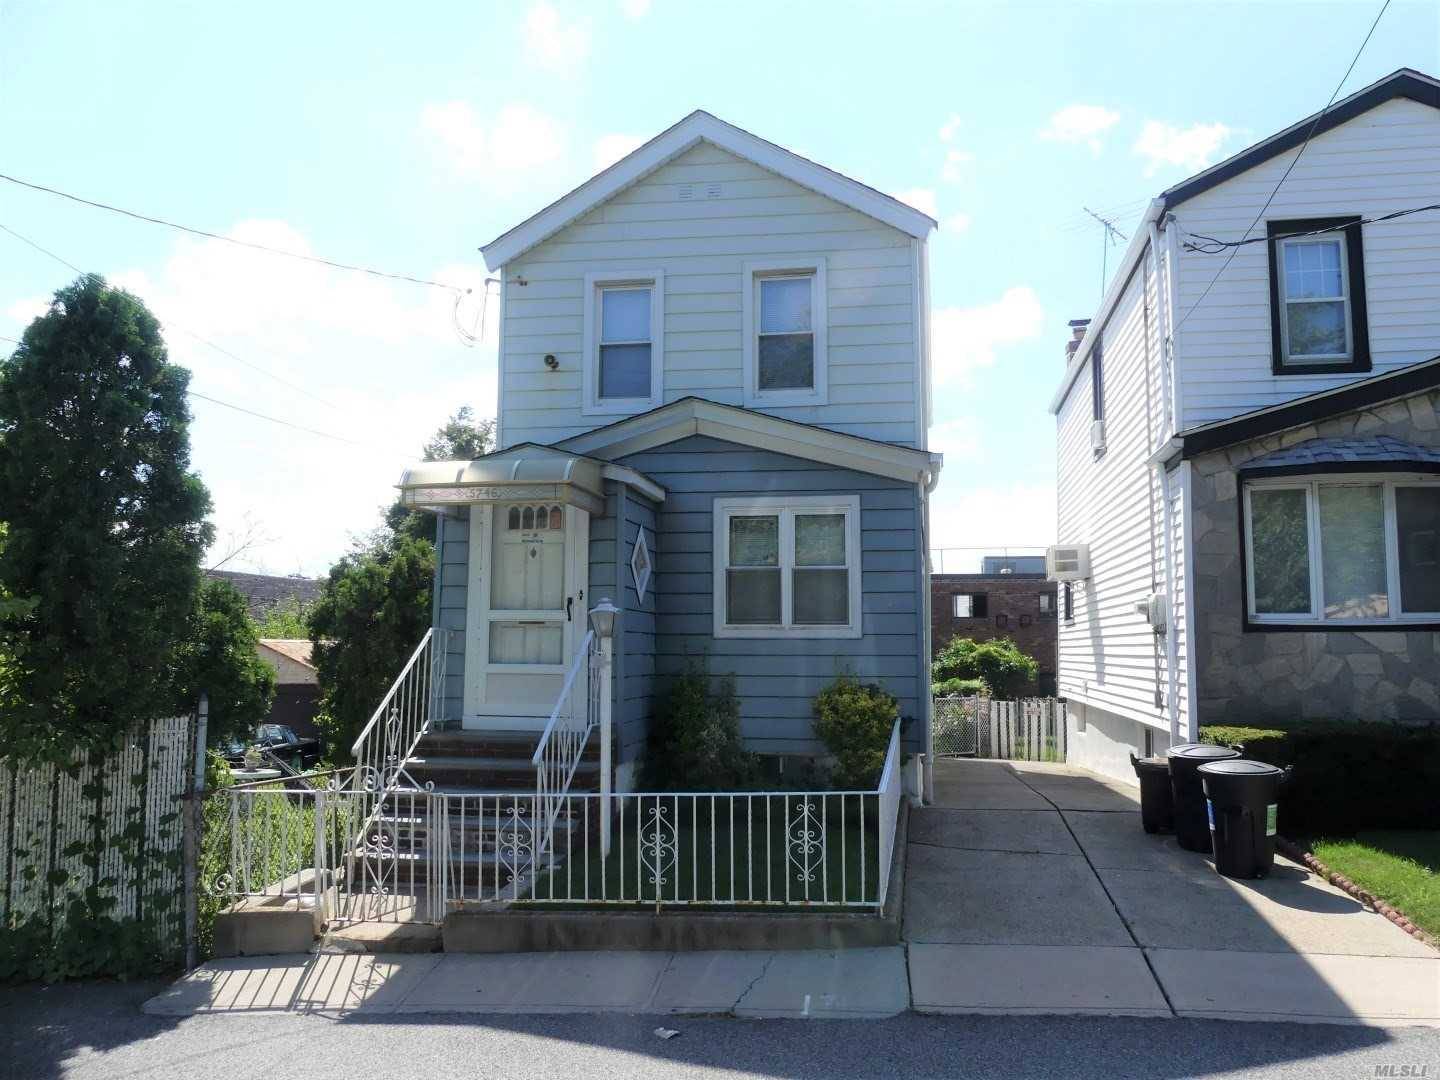 75th 3 BR House Middle Village LIC / Queens